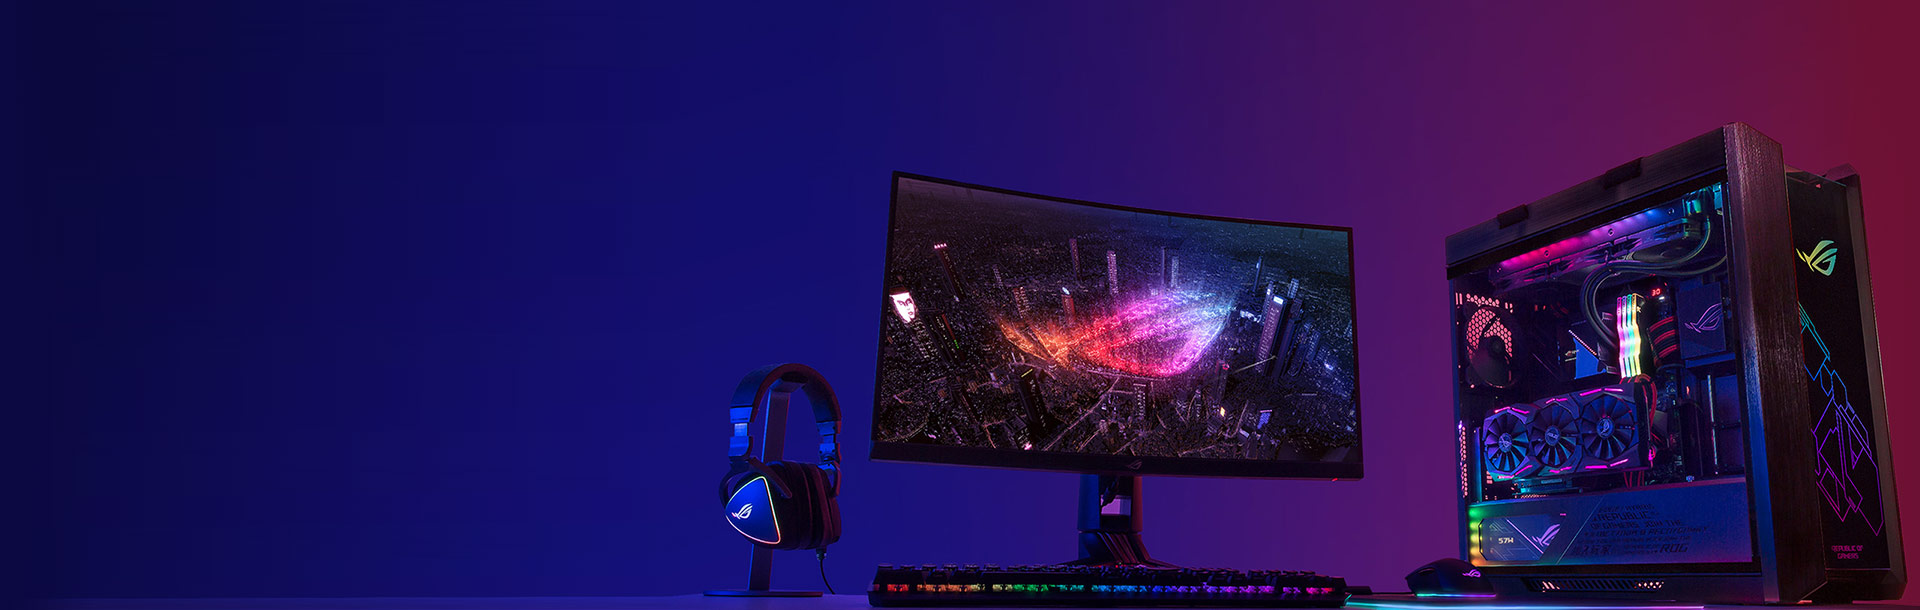 ROG Strix B660-I Gaming WiFi features diverse ROG ecosystem